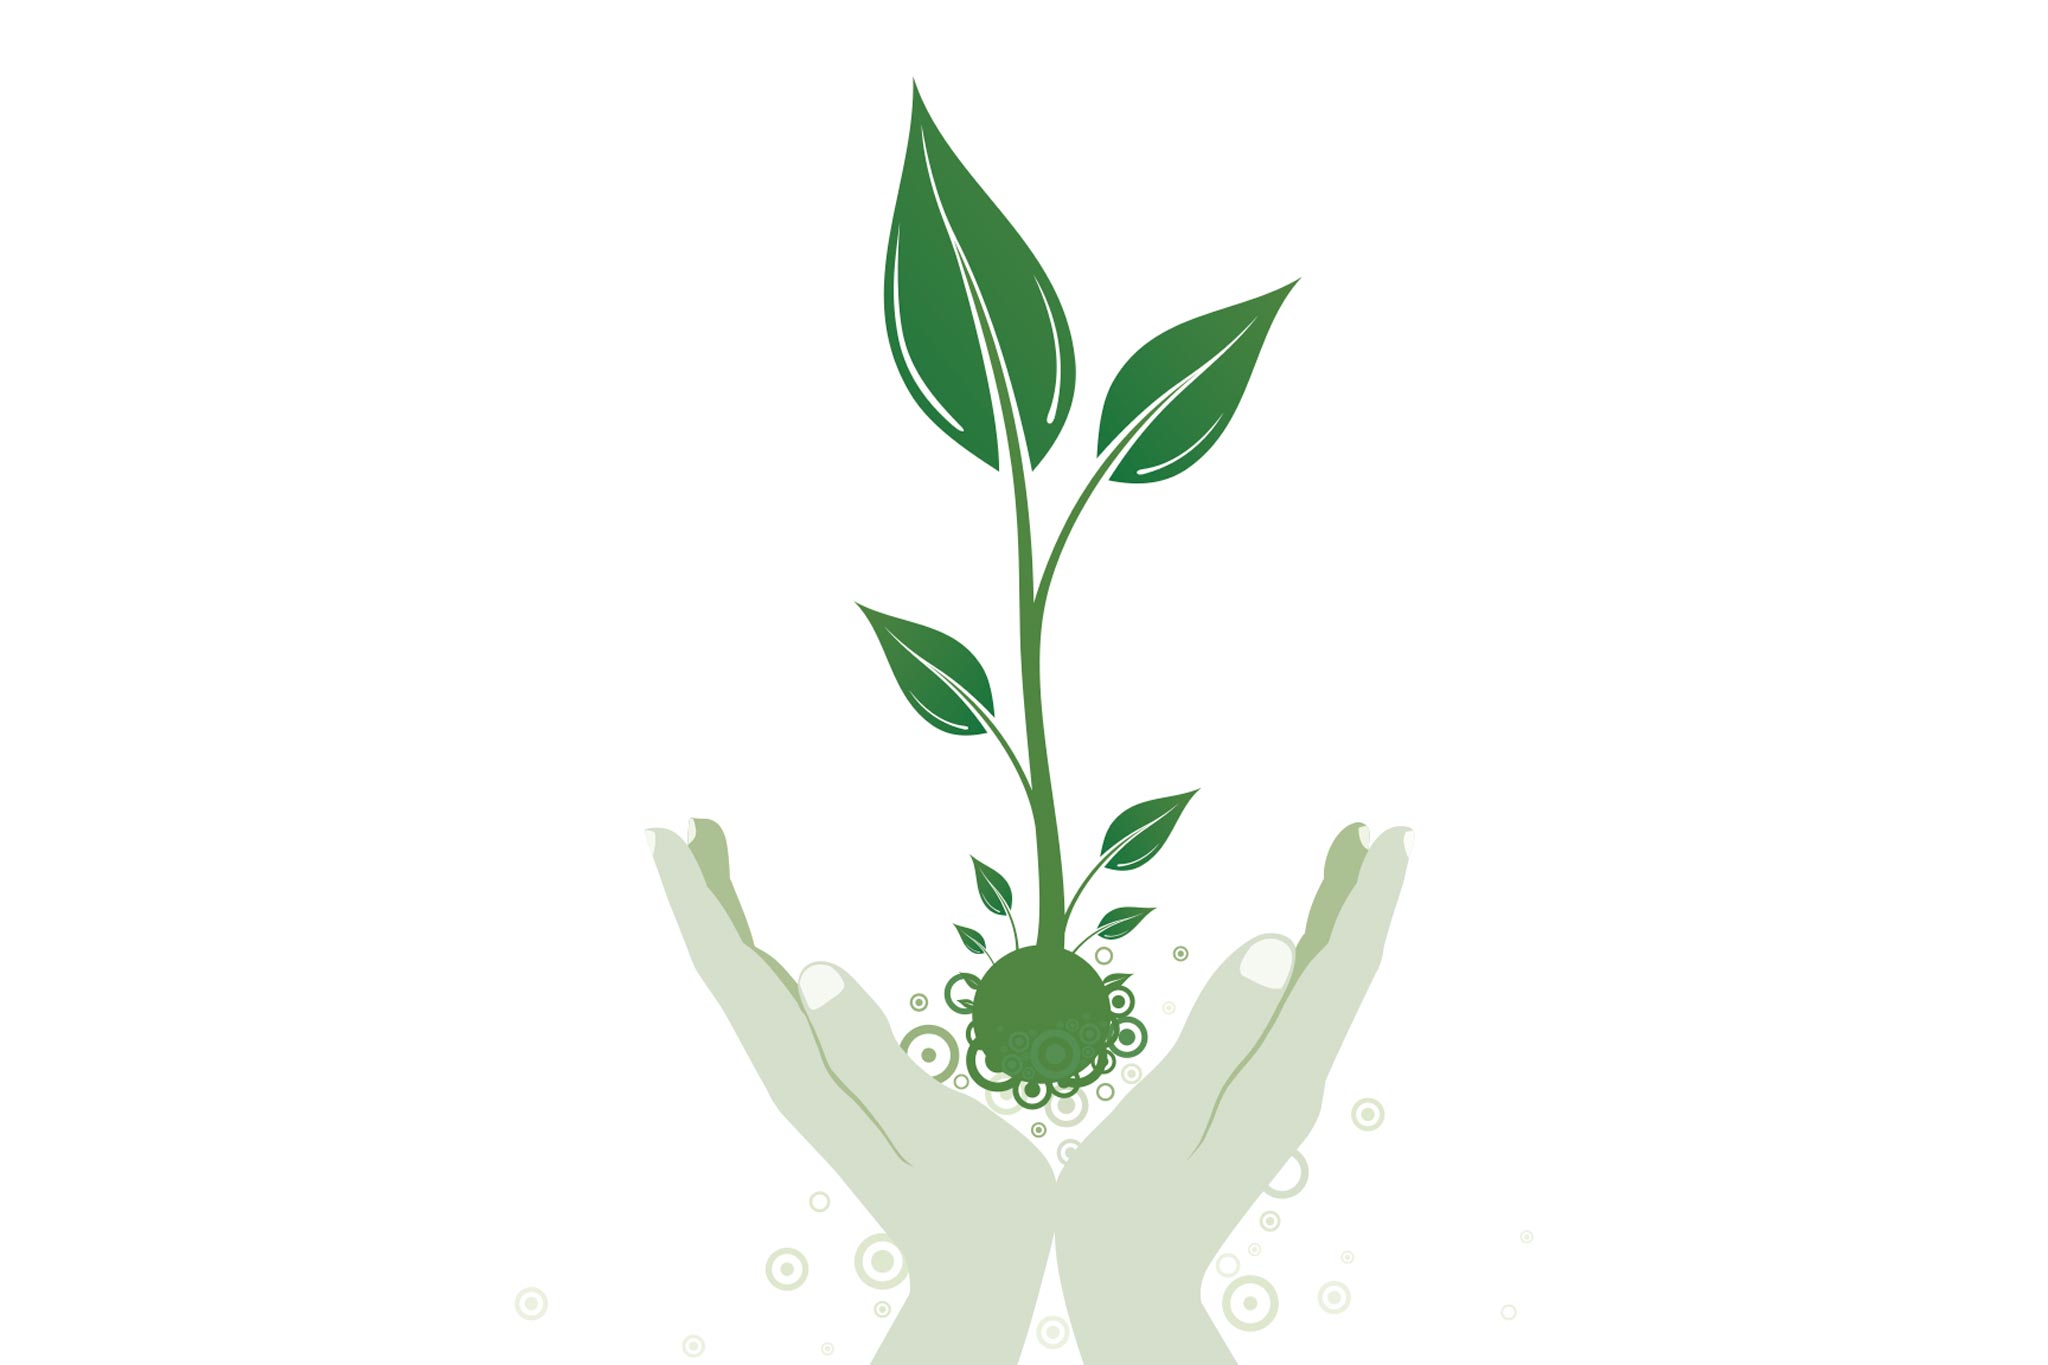 Illustration of hands holding a plant